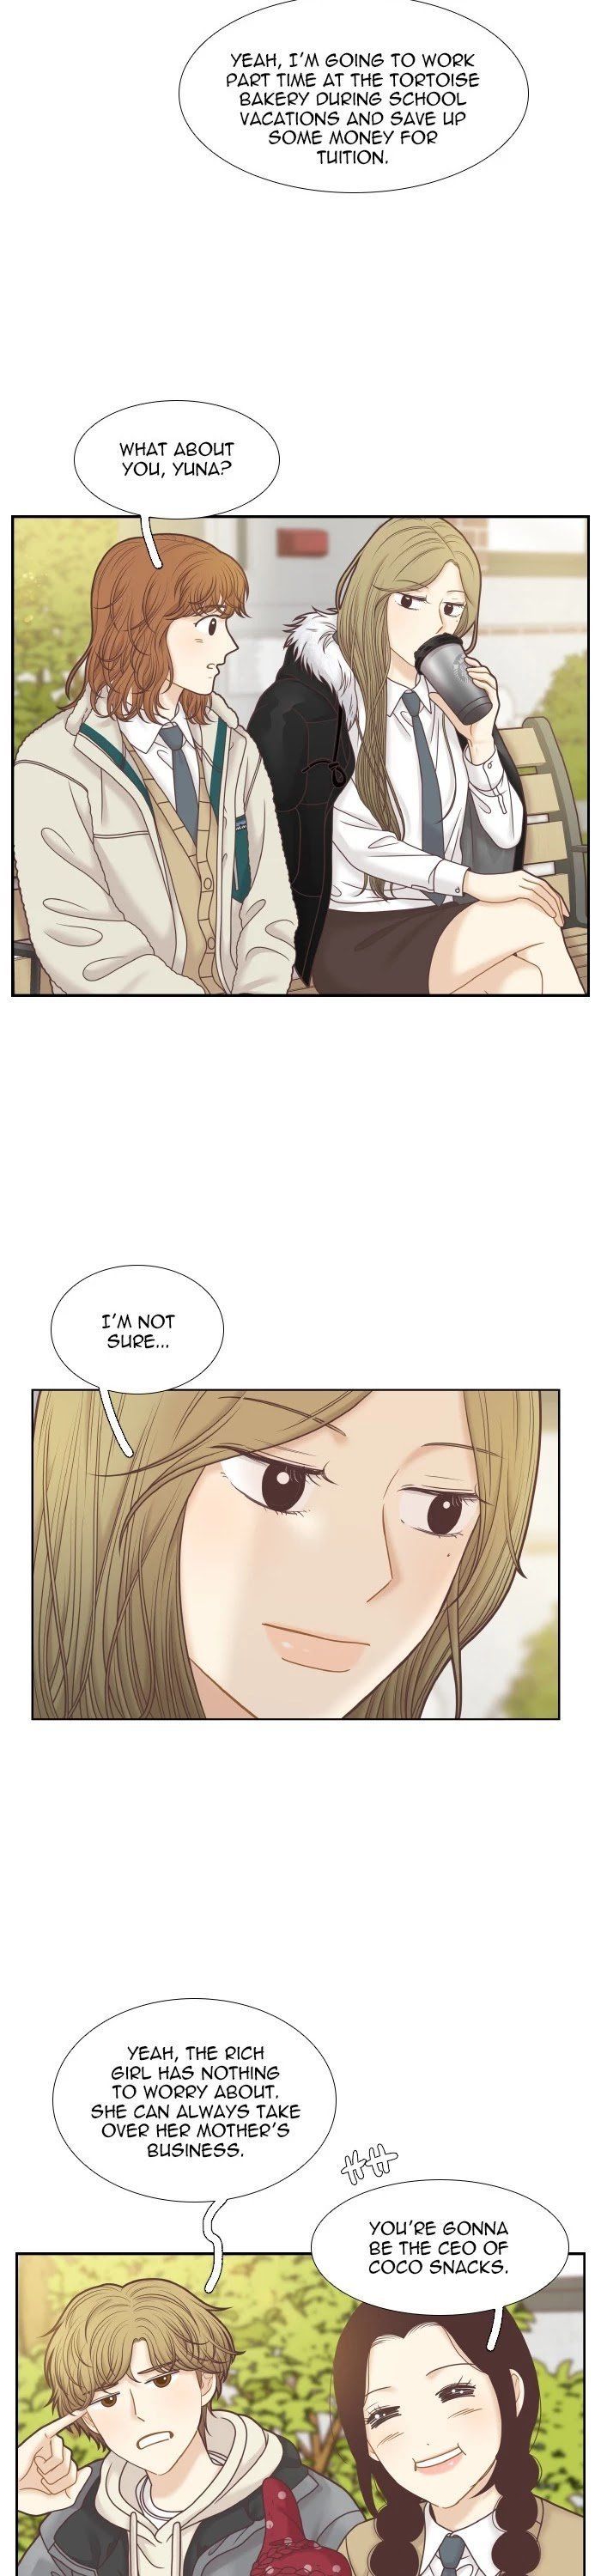 Girl’s World ( World of Girl ) Chapter 298 - Page 6